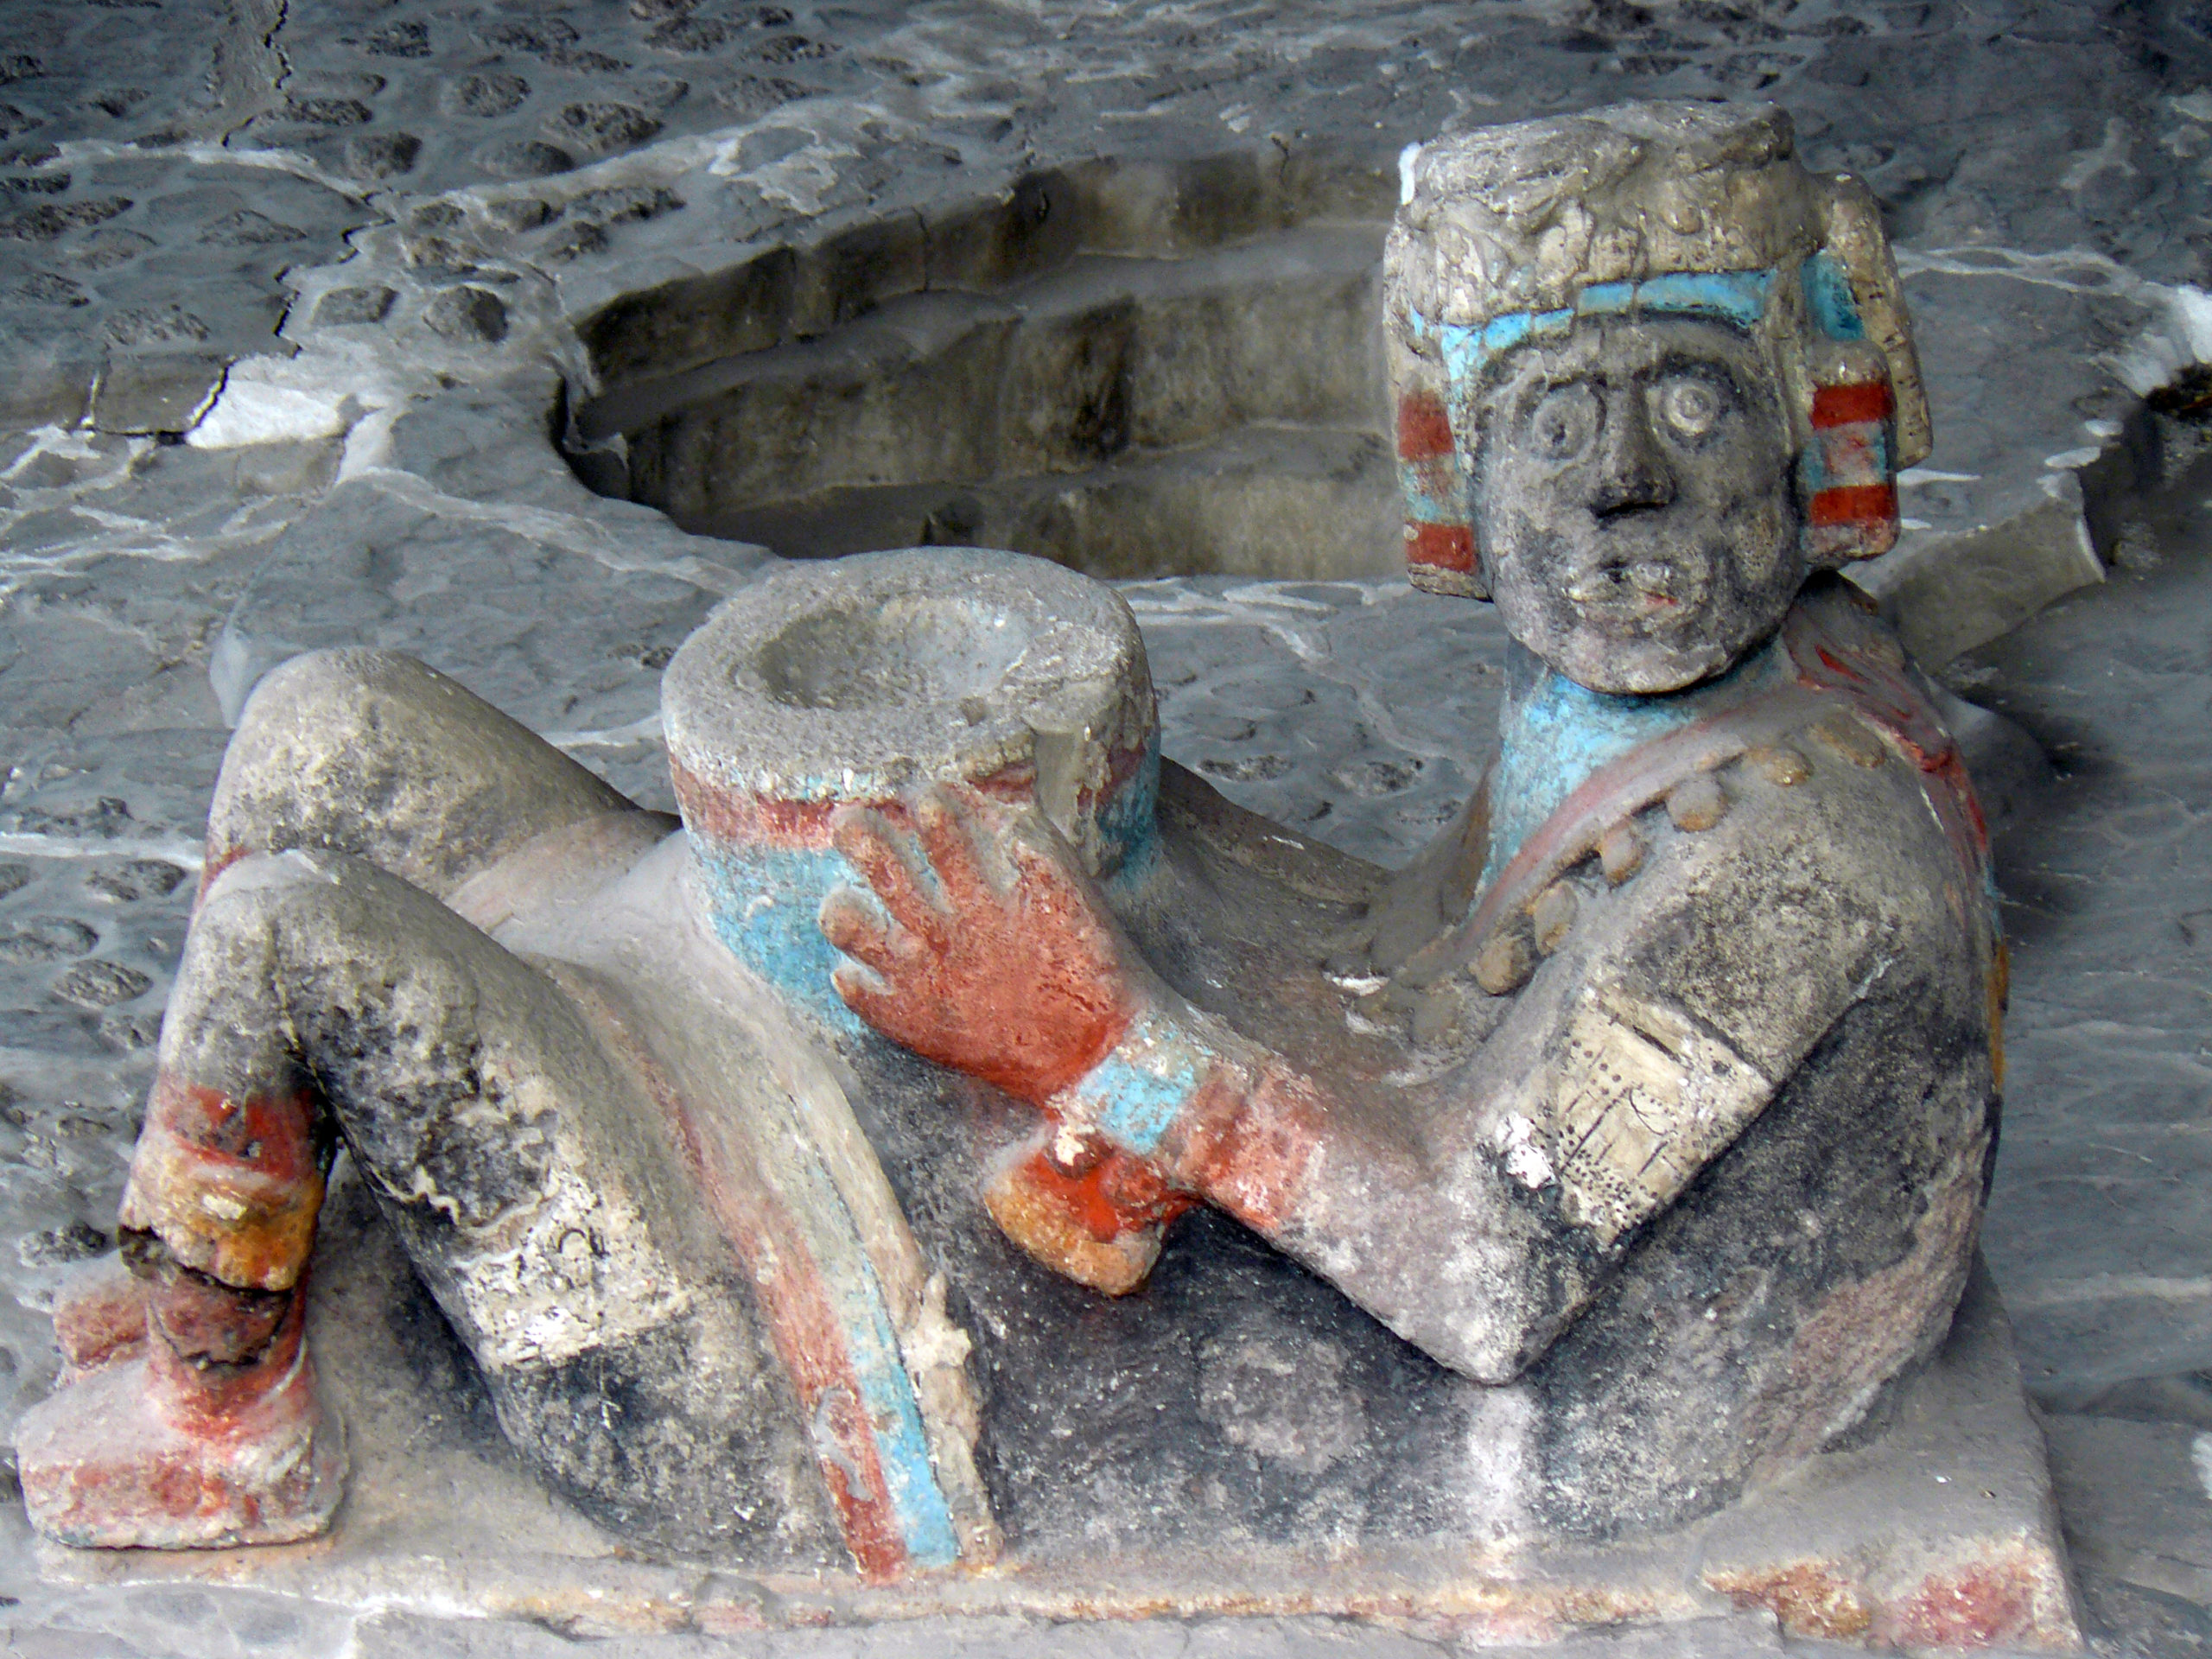 The Templo Mayor: A place for human sacrifices